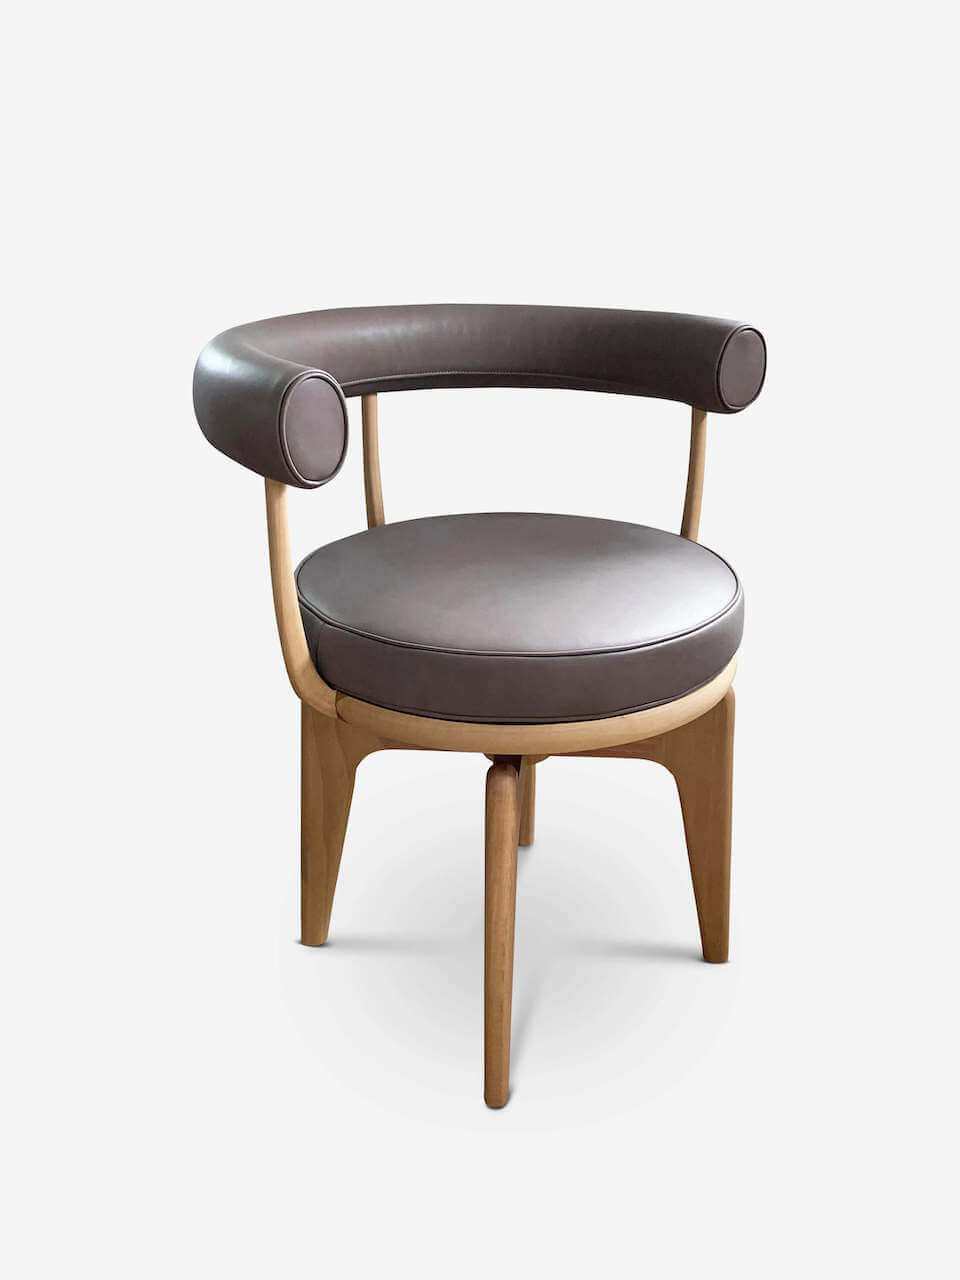 Charlotte Perriand - Indochine chair